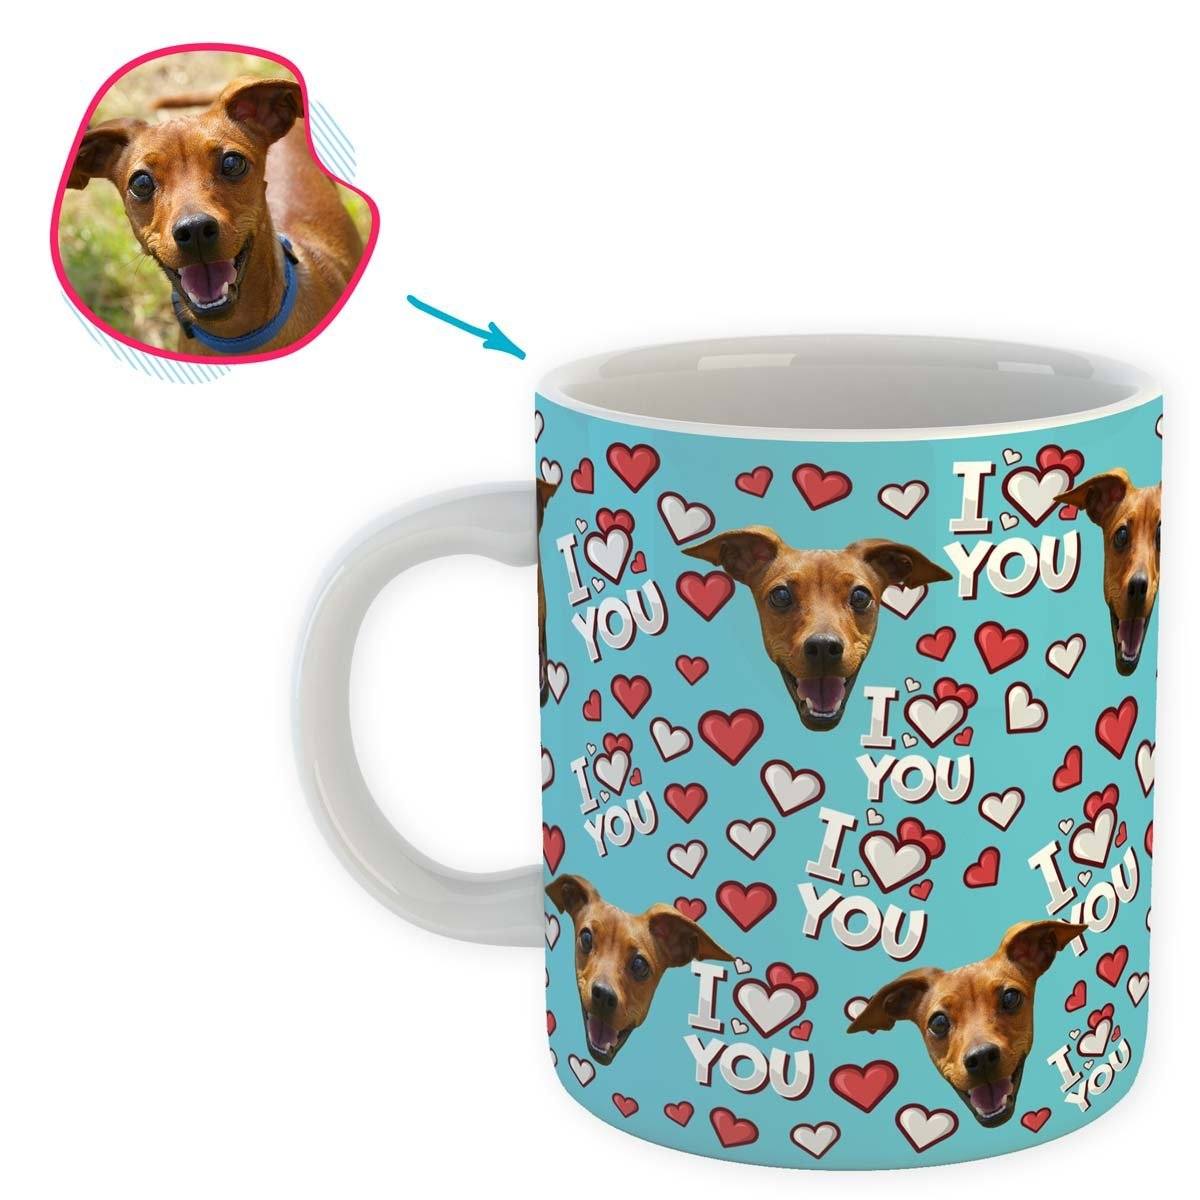 blue I Love You mug personalized with photo of face printed on it